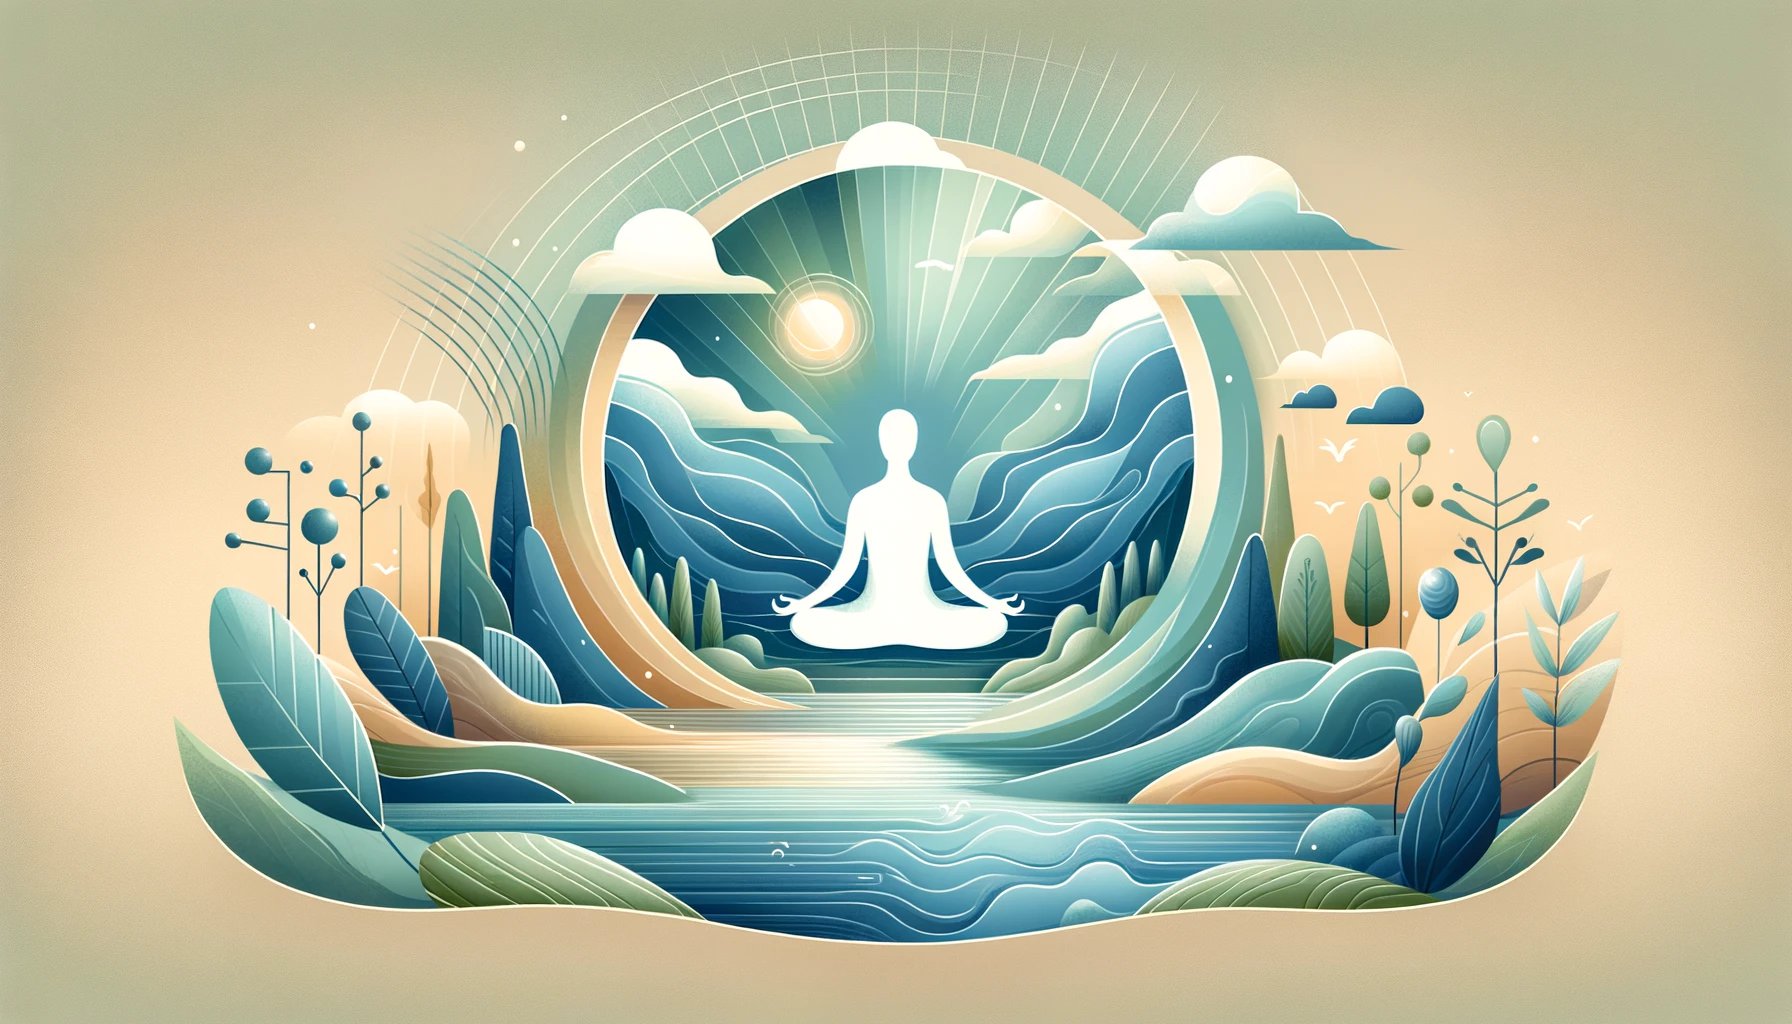 Illustration of person practicing mindfulness.